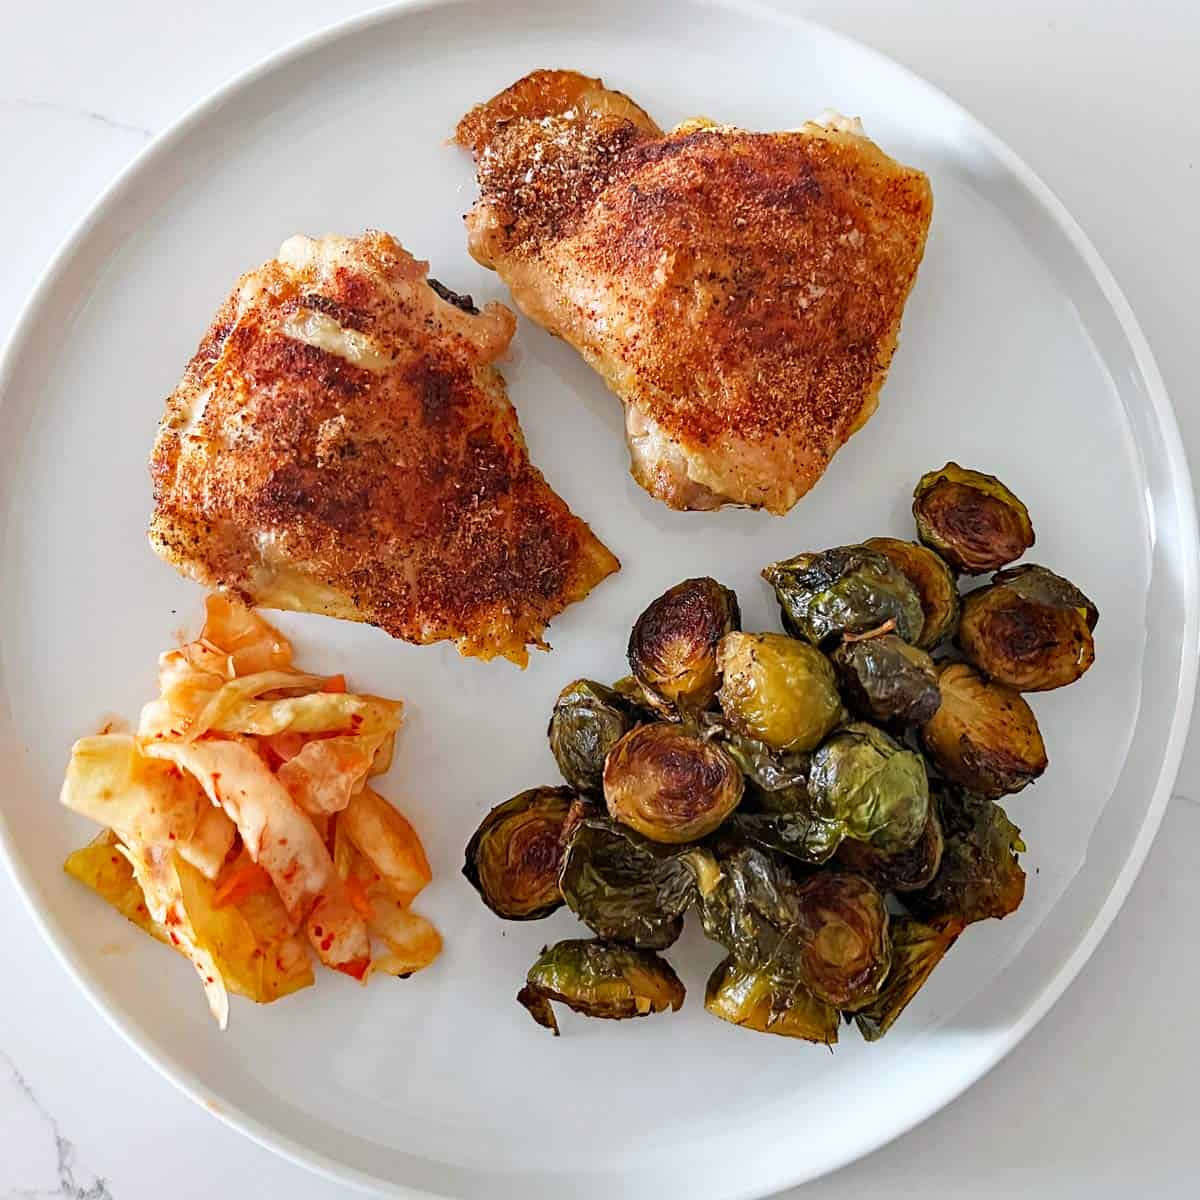 Two baked chicken thighs are served with roasted Brussels sprouts and kimchi.